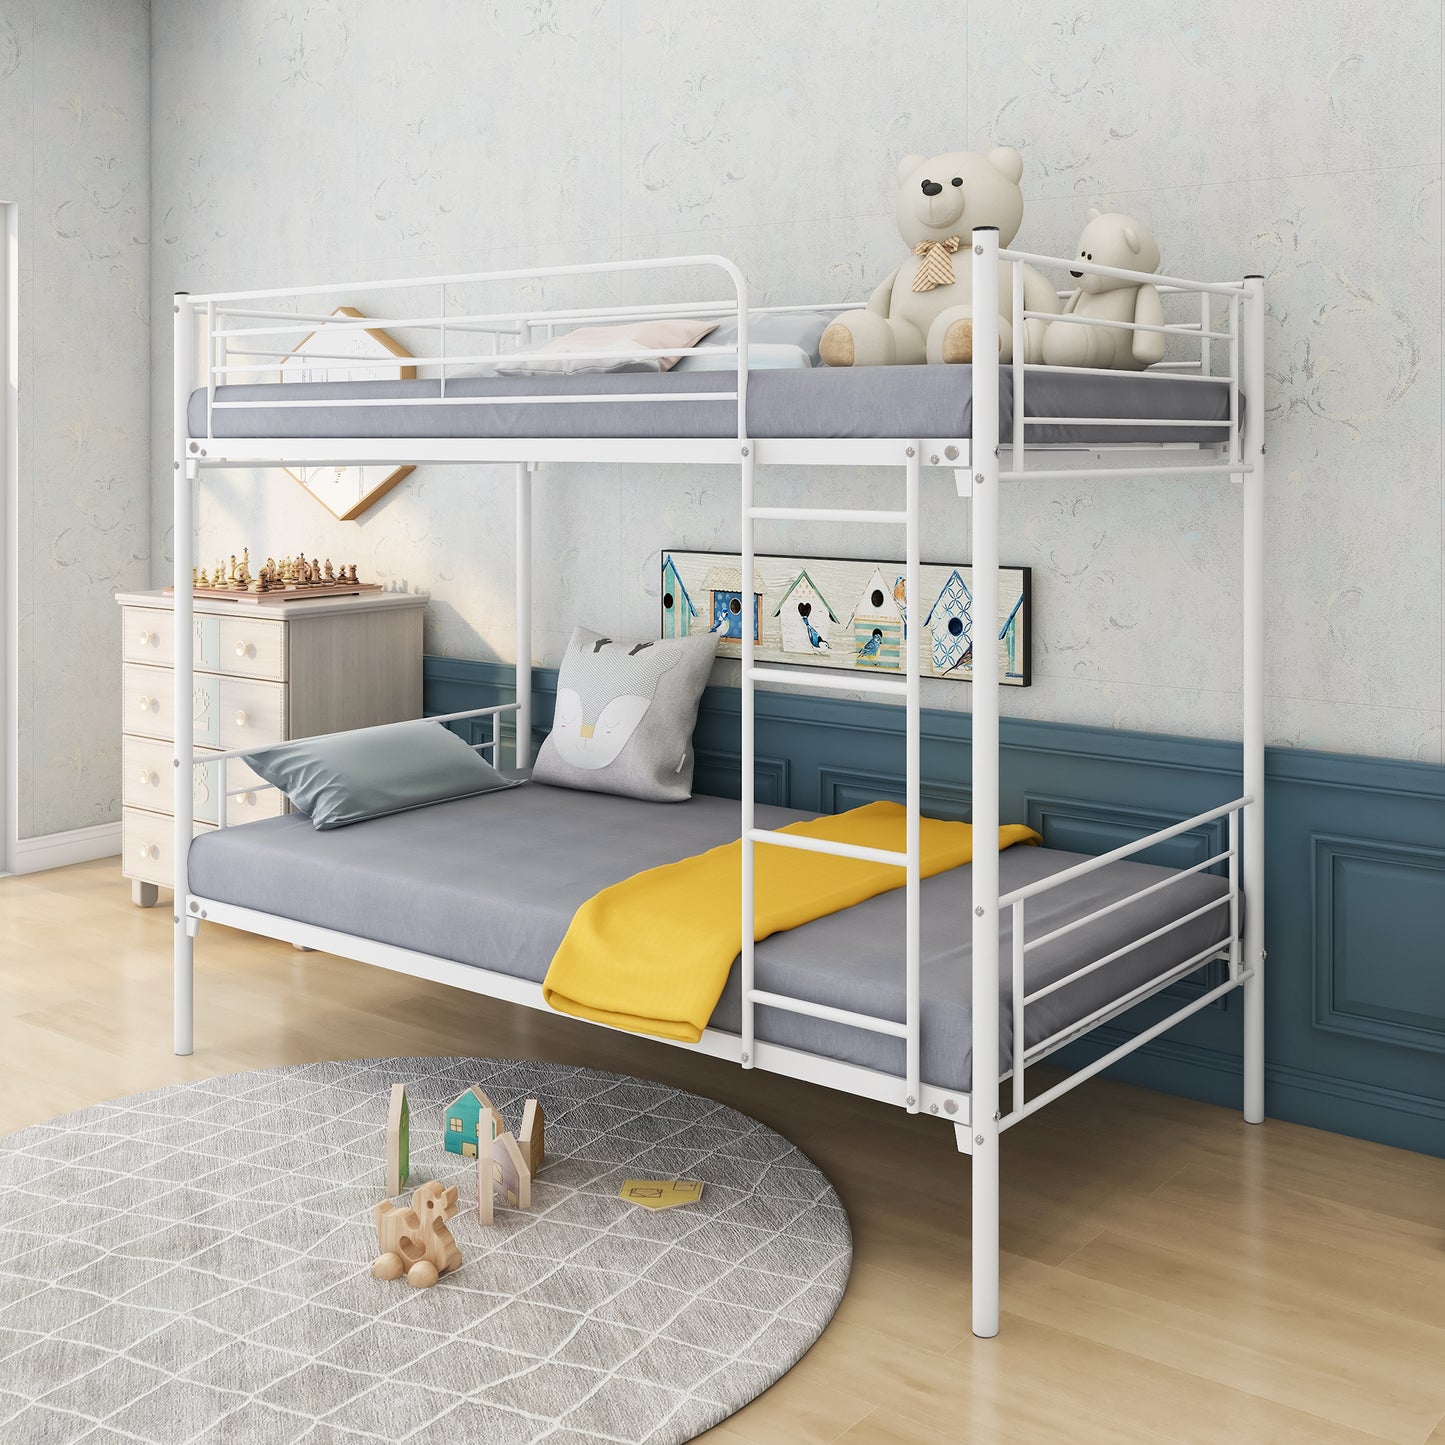 Twin-Over-Twin Bunk Bed with Metal Frame and Ladder, Space-Saving Design,White